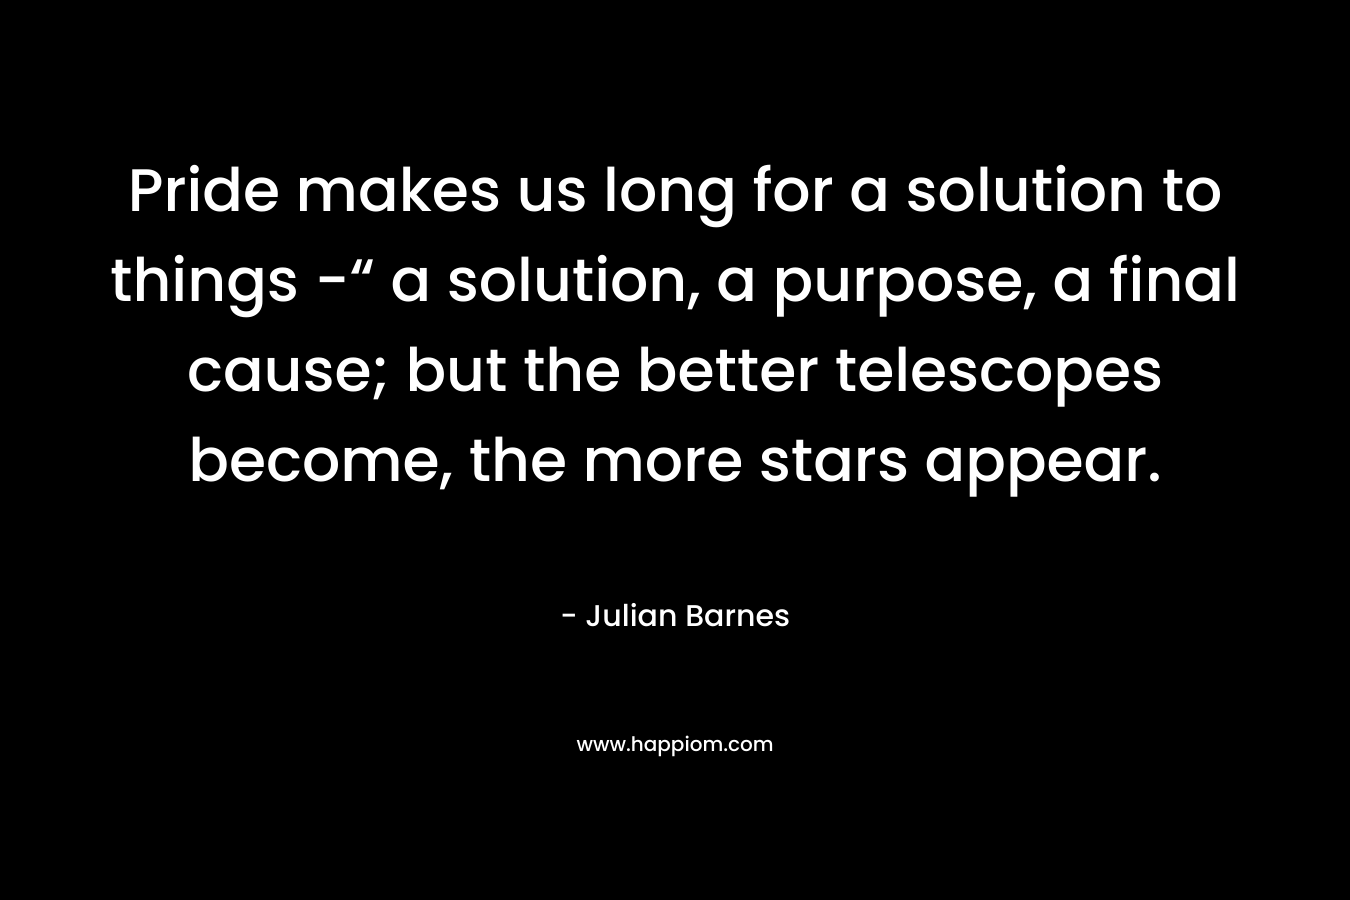 Pride makes us long for a solution to things -“ a solution, a purpose, a final cause; but the better telescopes become, the more stars appear. – Julian Barnes